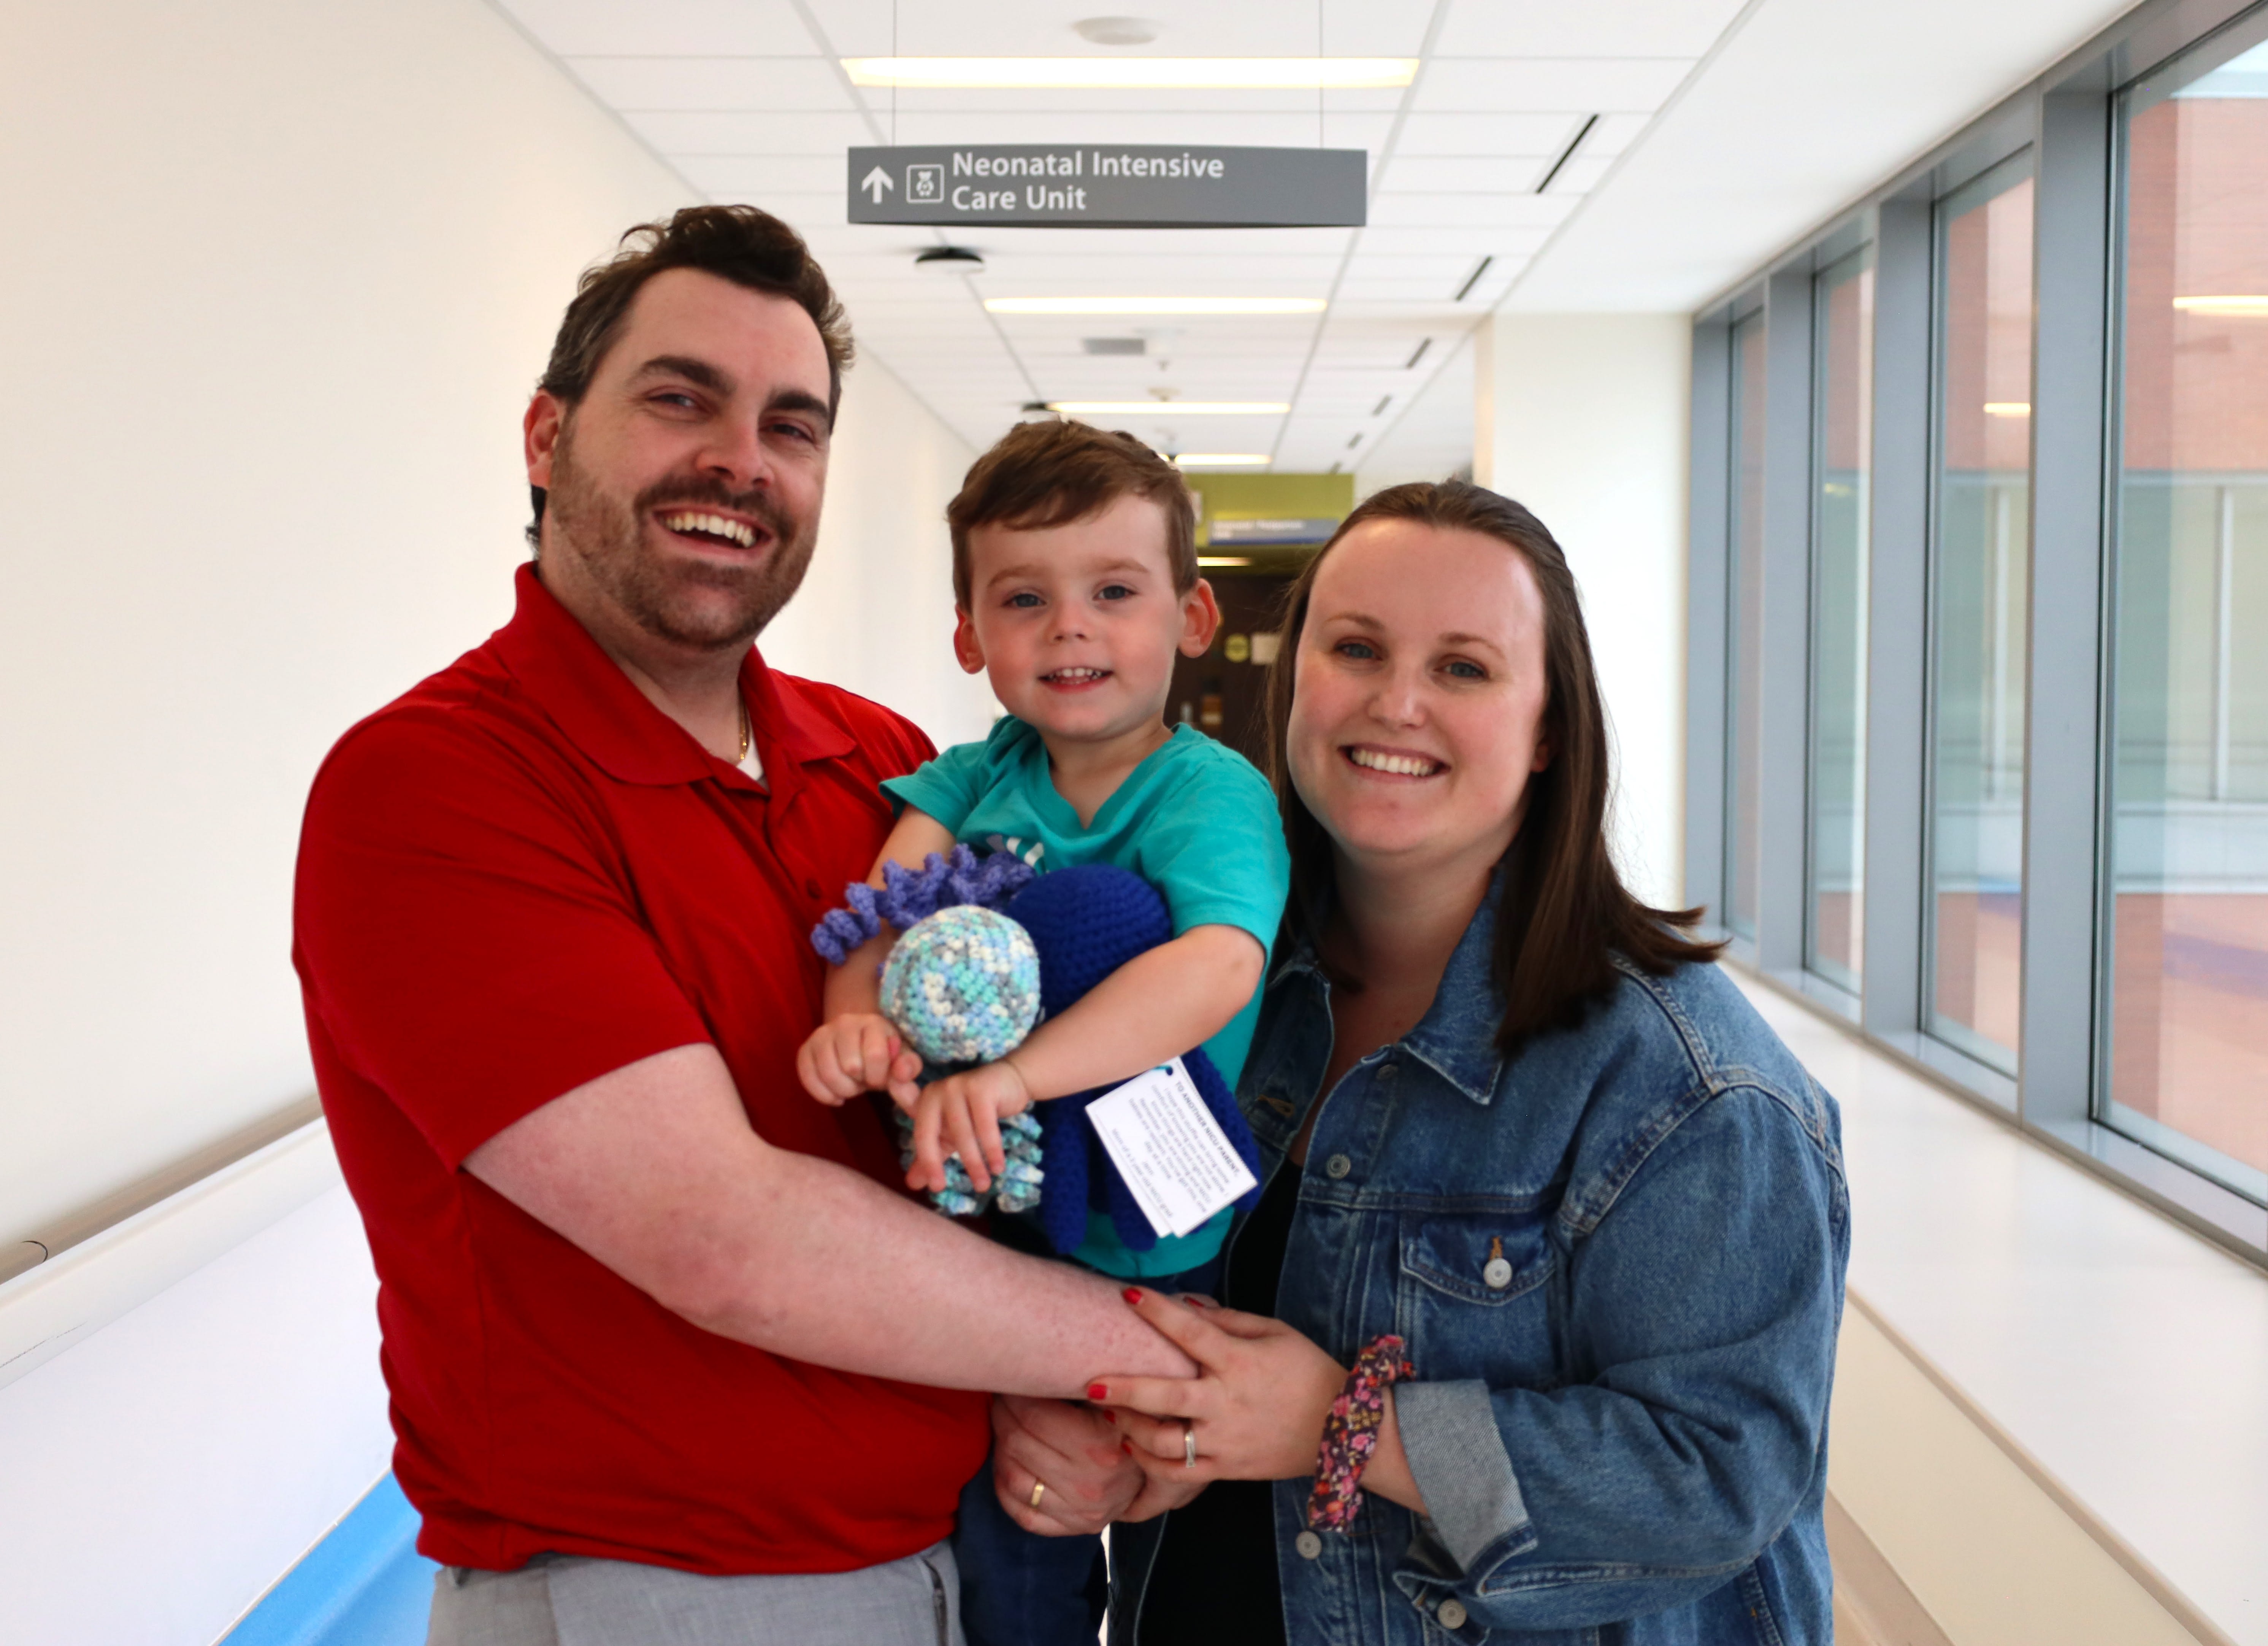 Joe and Jenn Marinelli hold their son, Theo, outside the doors of the neonatal intensive care unit at the Marotta Family Hospital in St. Catharines. Jenn recently donated octopus toys she crocheted to provide some comfort to patients and their families in the NICU.